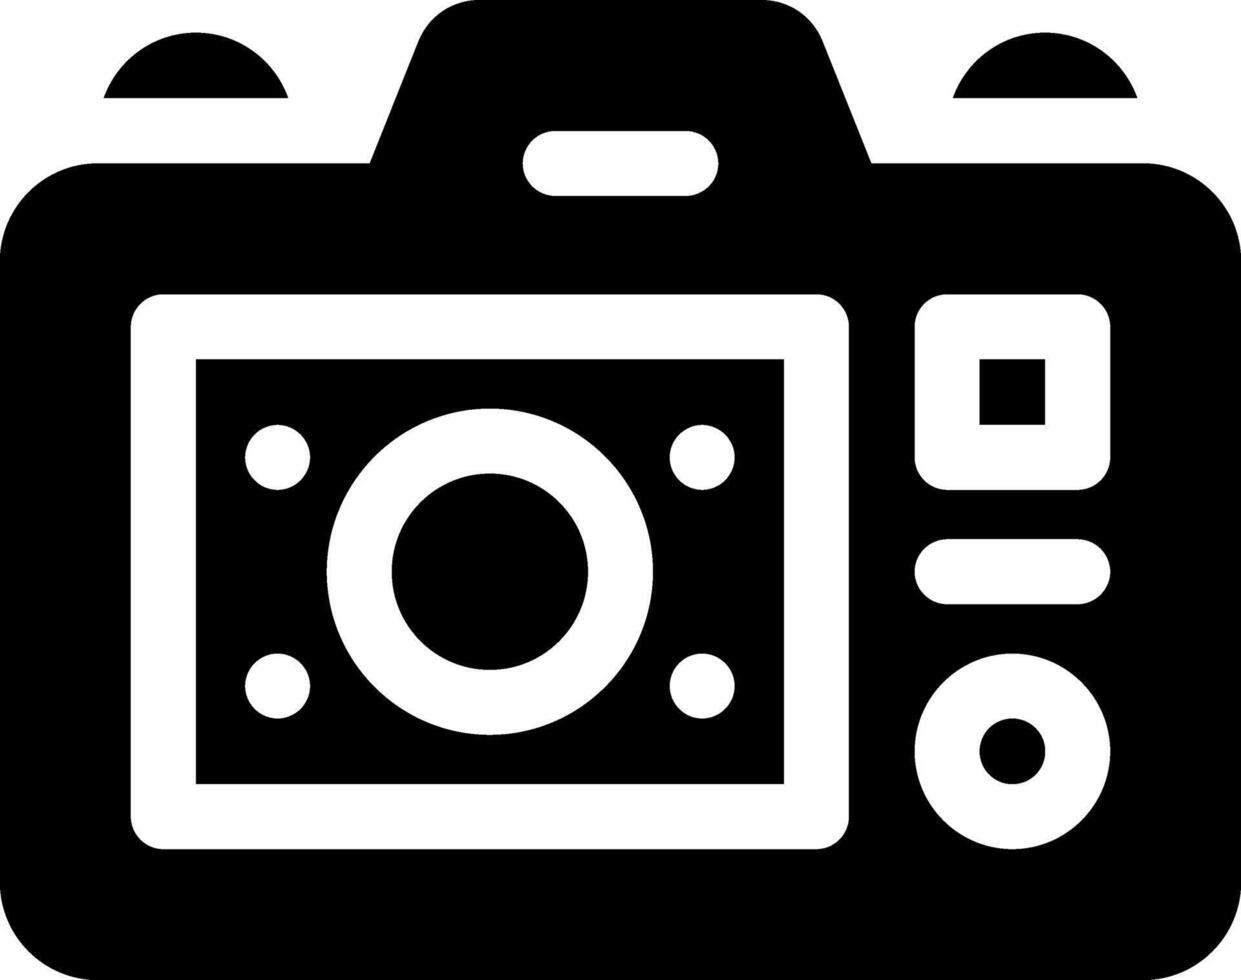 this icon or logo camera icon or other where it explaints type camera type or camera type and others or design application software vector